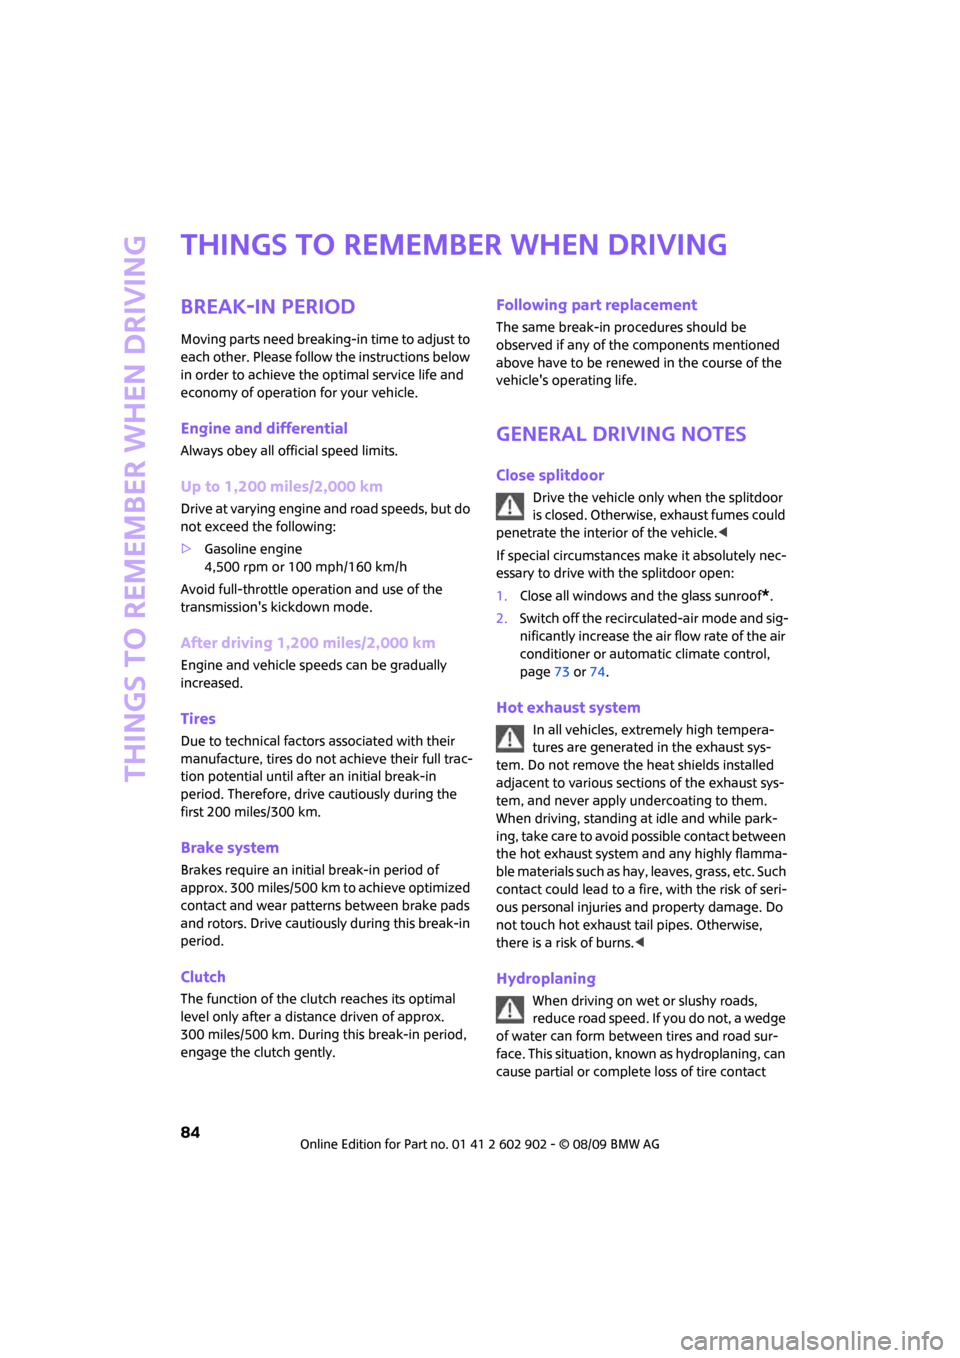 MINI Clubman 2010  Owners Manual Things to remember when driving
84
Things to remember when driving
Break-in period
Moving parts need breaking-in time to adjust to 
each other. Please follow the instructions below 
in order to achiev